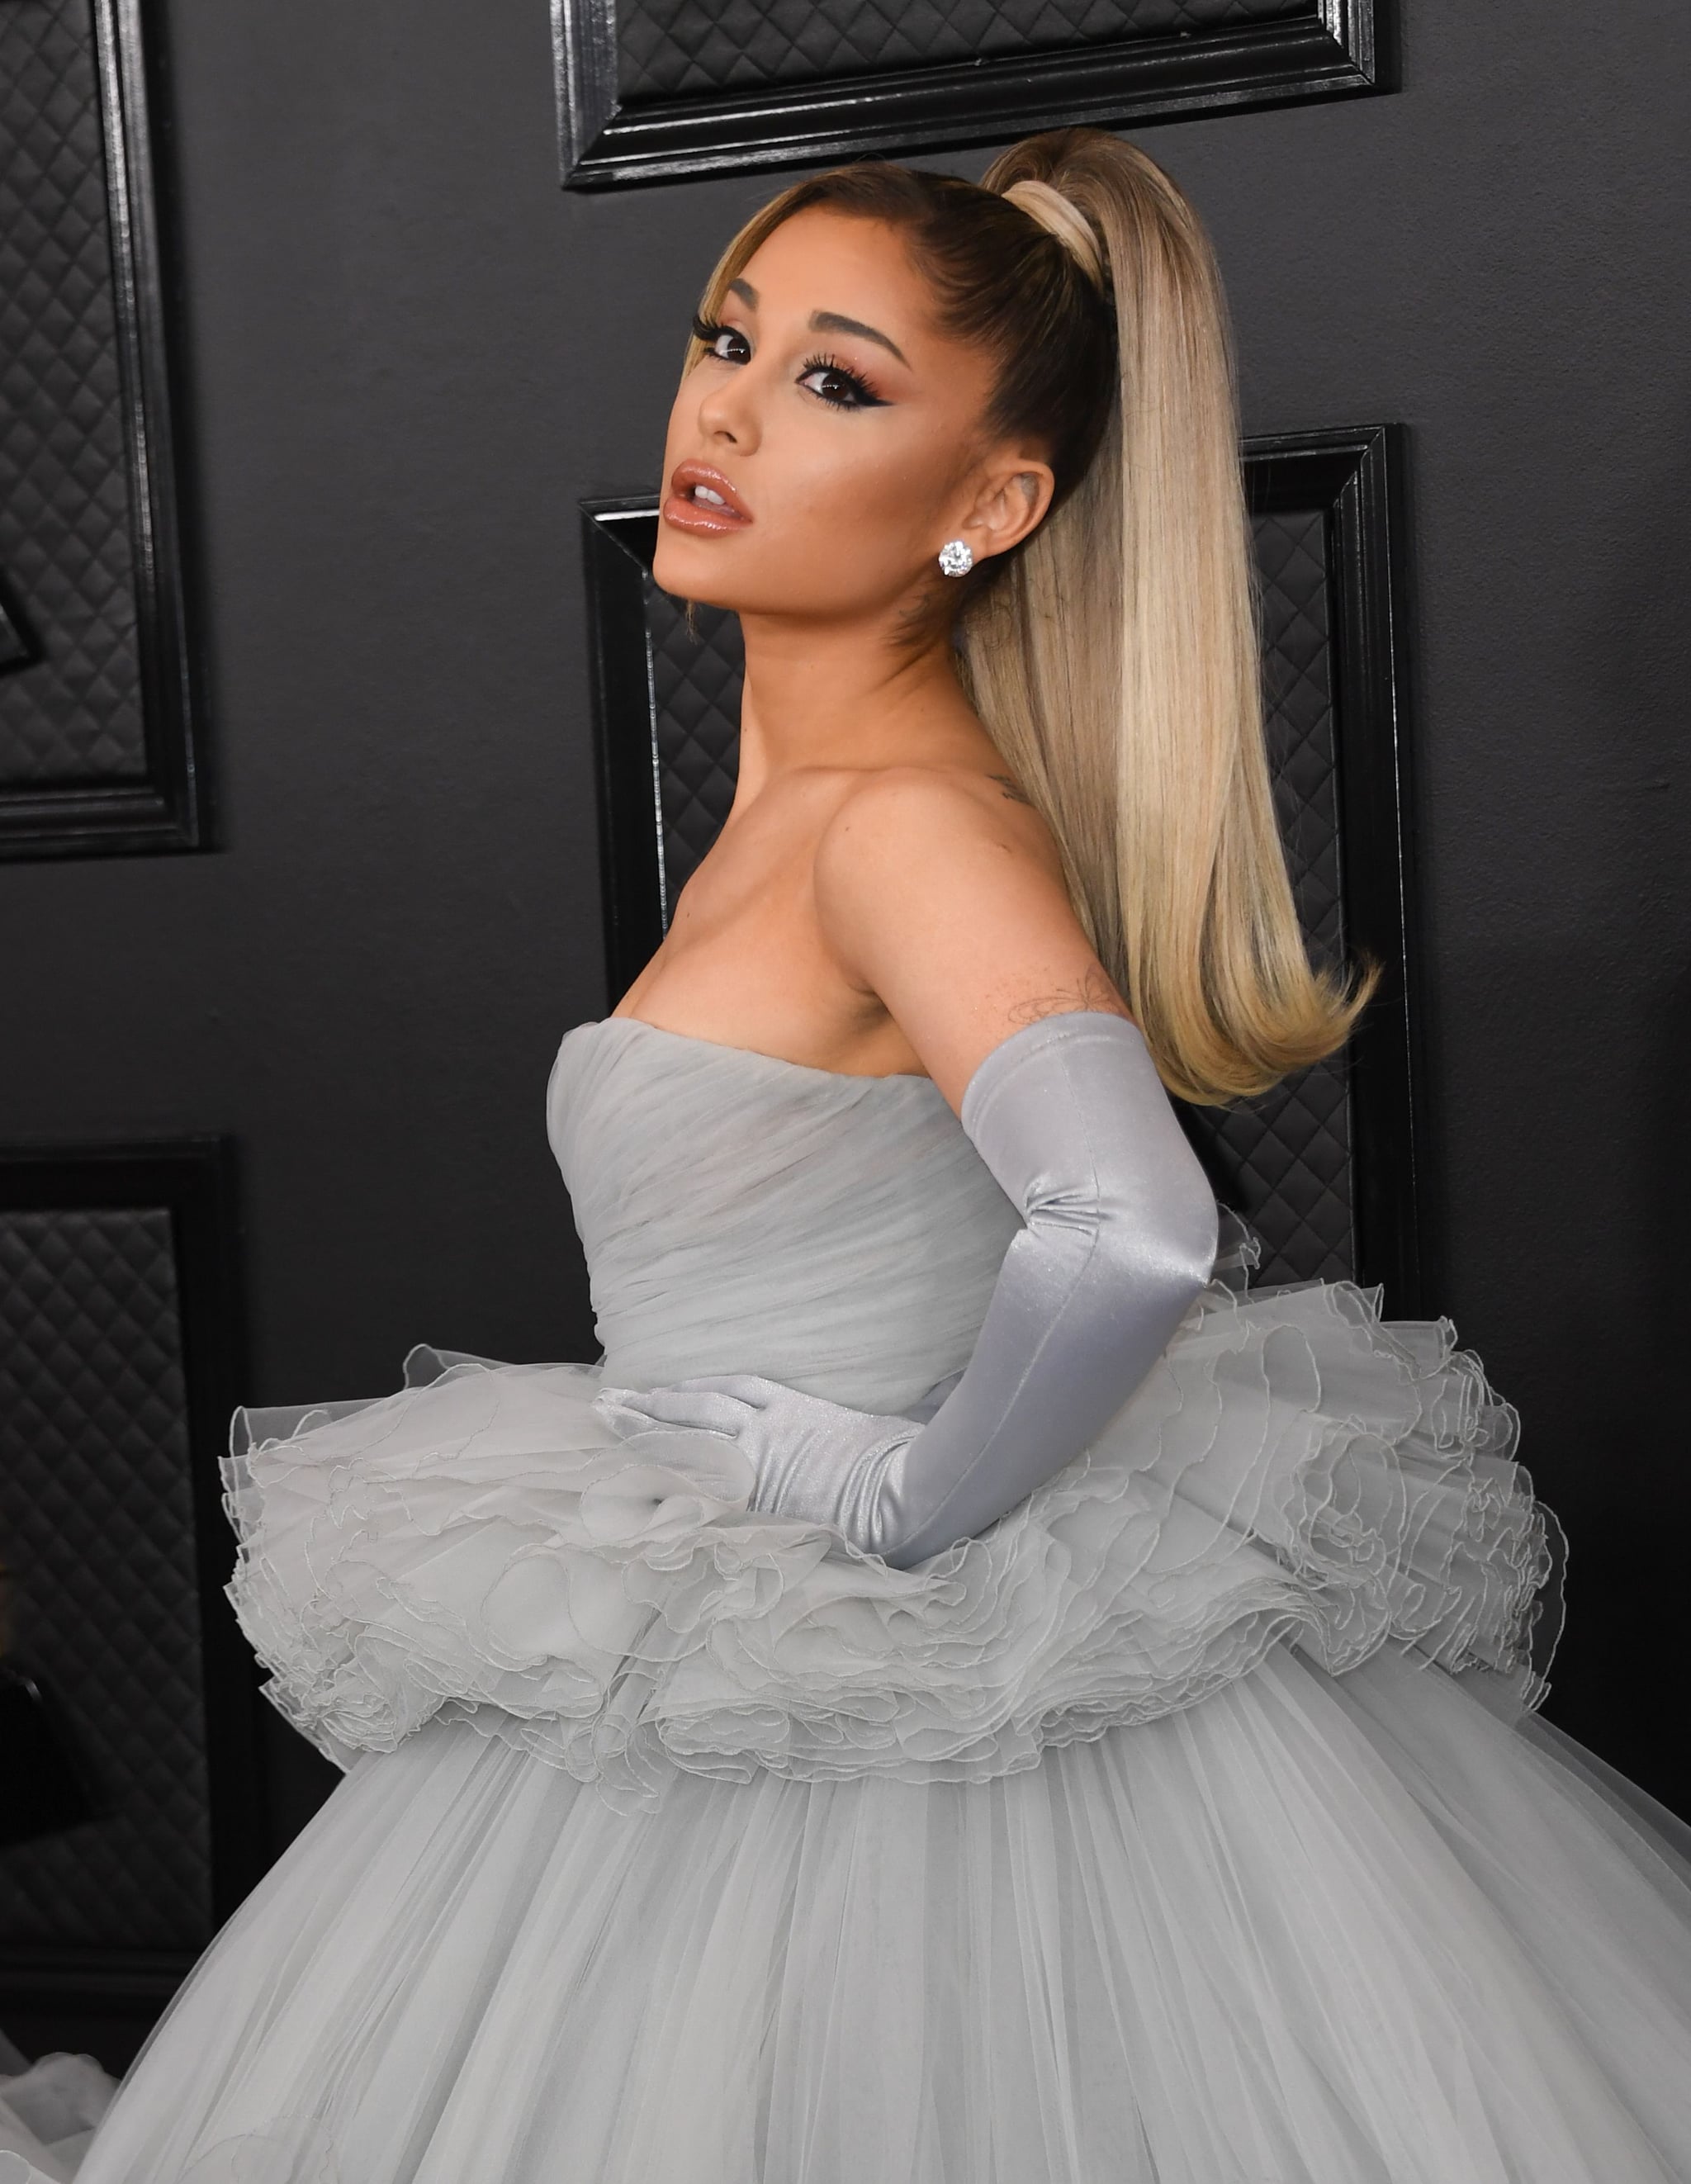 Ariana Grande S Butterfly Tattoo At The Grammys Even The Biggest Ariana Grande Stan Might Have Missed Her New Tattoo Popsugar Beauty Photo 2